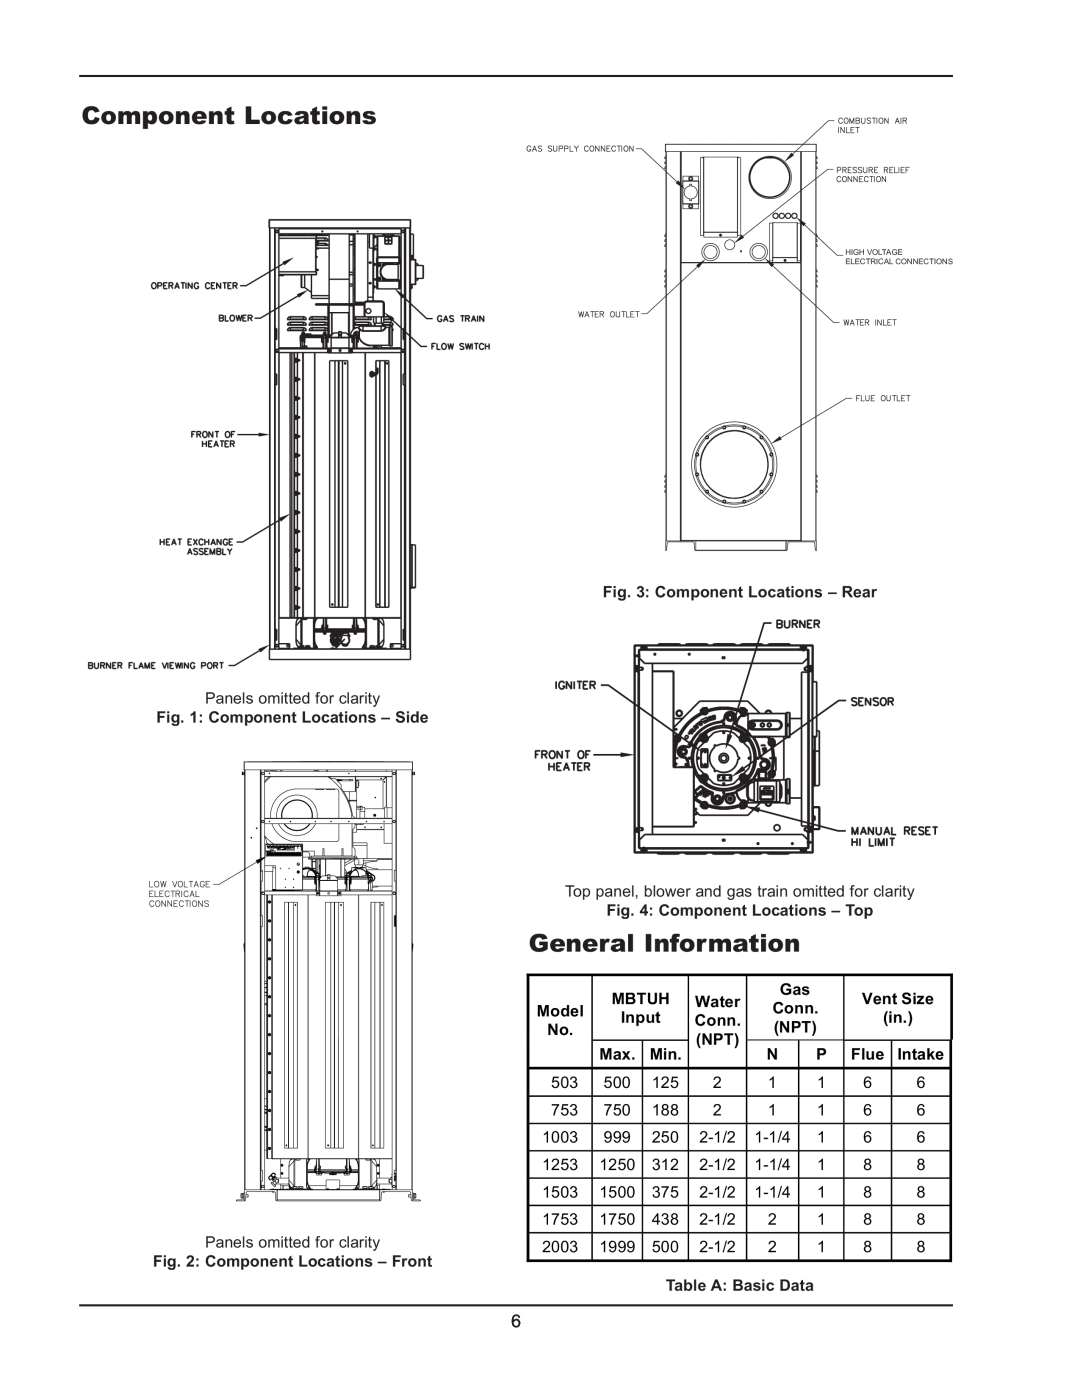 Raypak 503-2003 General Information, Component Locations - Side, Component Locations - Front, Mbtuh, Water, Vent Size 